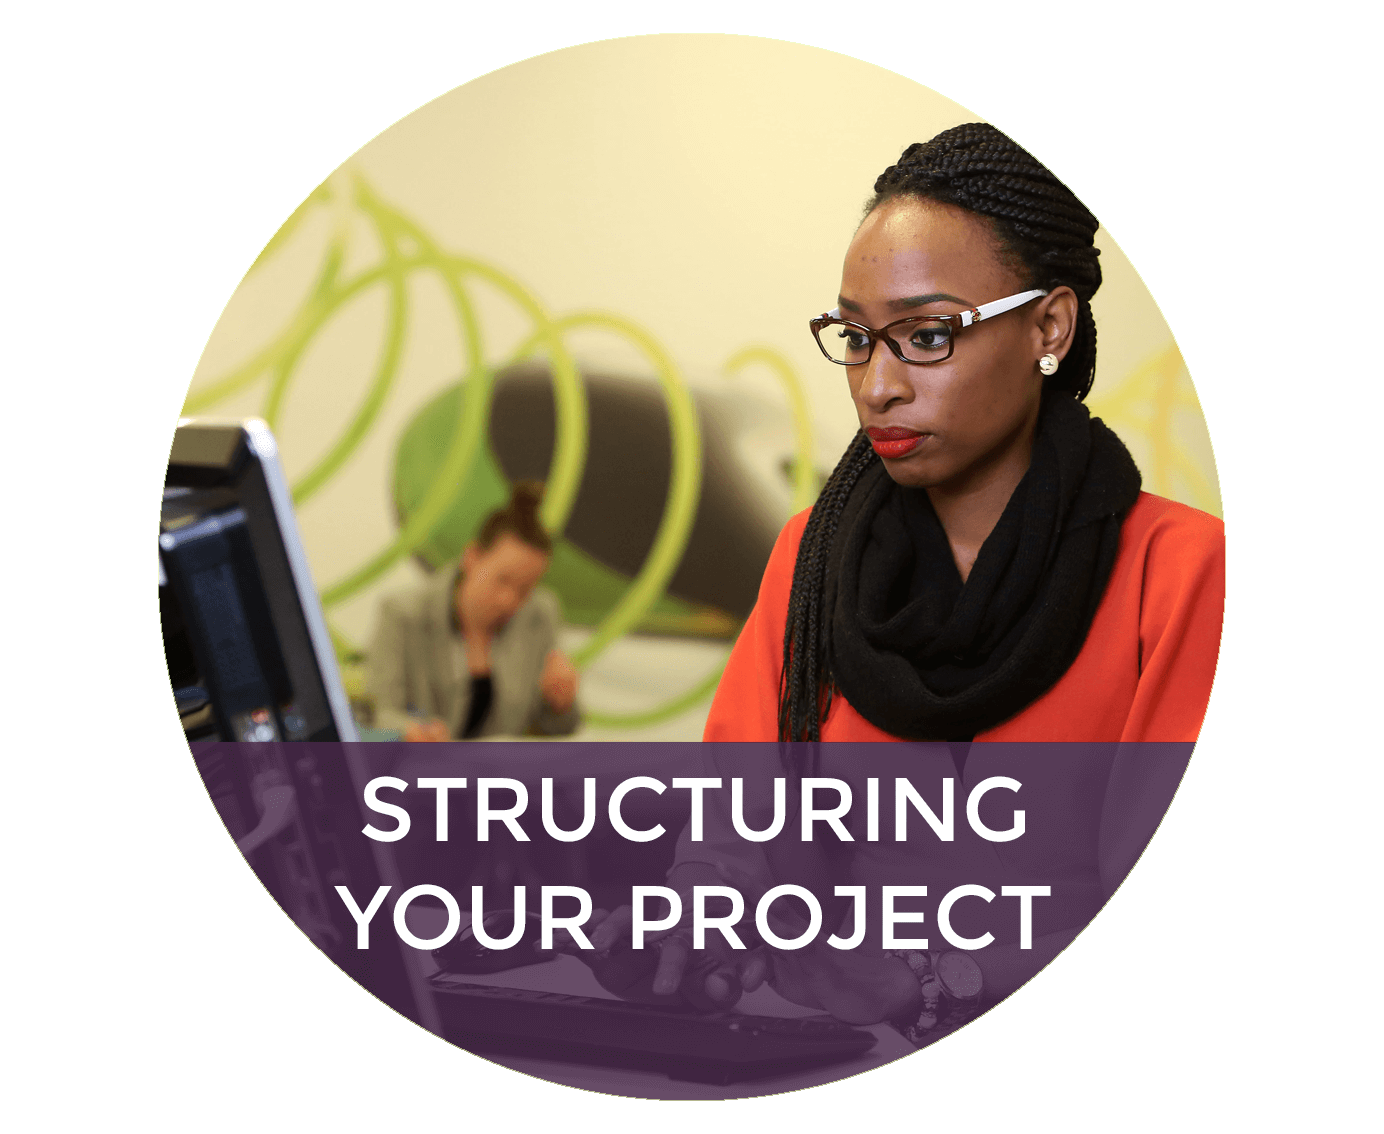 Structuring Your Project